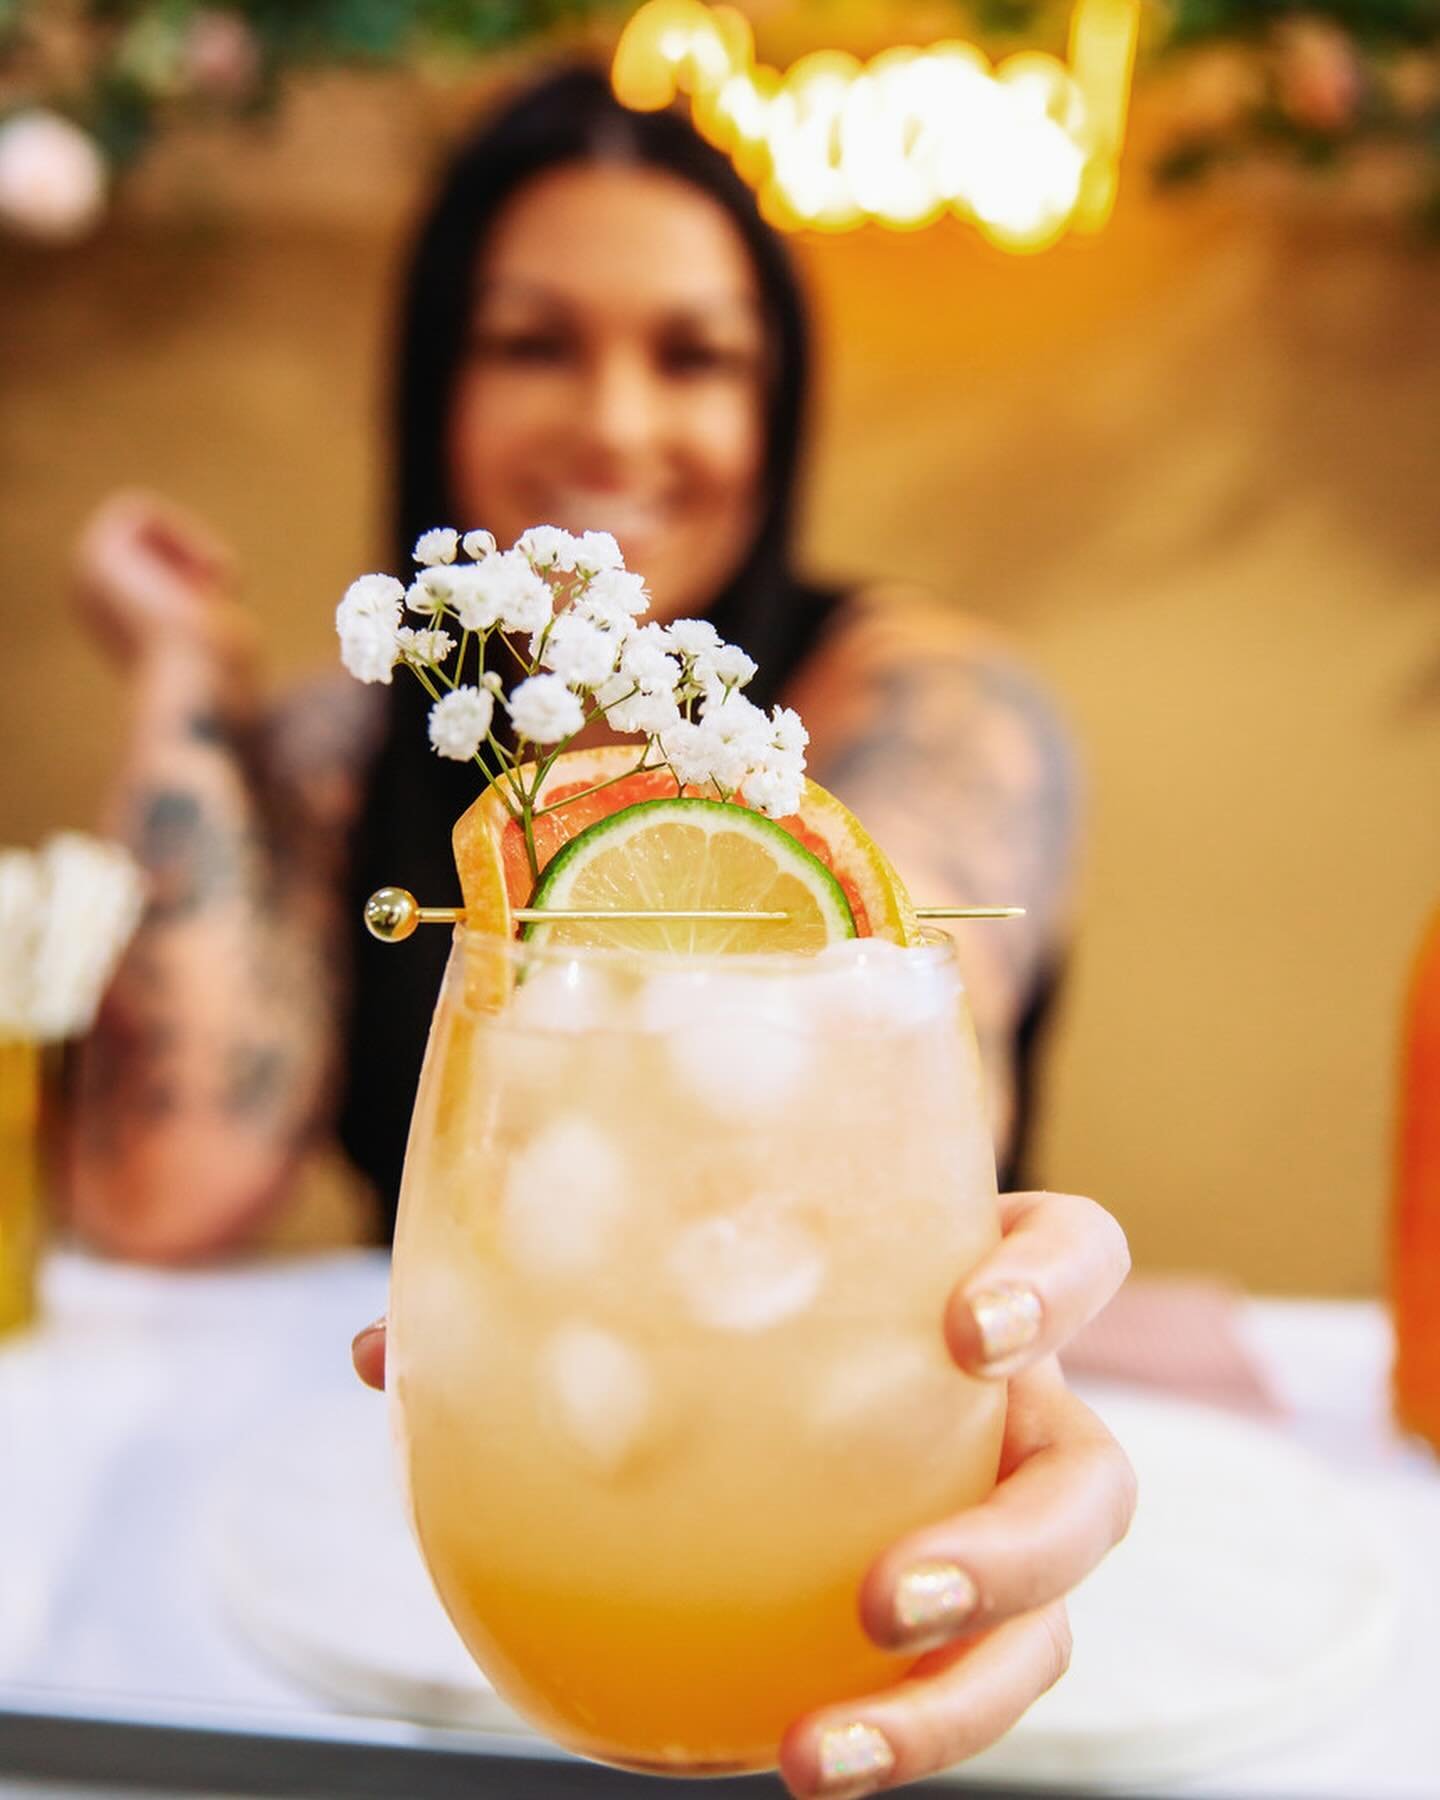 It&rsquo;s the cute ice for me💁🏻&zwj;♀️ 

The🔥📸by @brittanythurmanportraits 
&bull;
&bull;
&bull;
🪩 Host: @sothisislovesocials / @kelseelkins
📍Studio: @theworkshop.cbv
💐 Florals: @fearlessflorals_
🧺 Picnic: @coloradoluxepicnics
🍸 Bar: @luna.